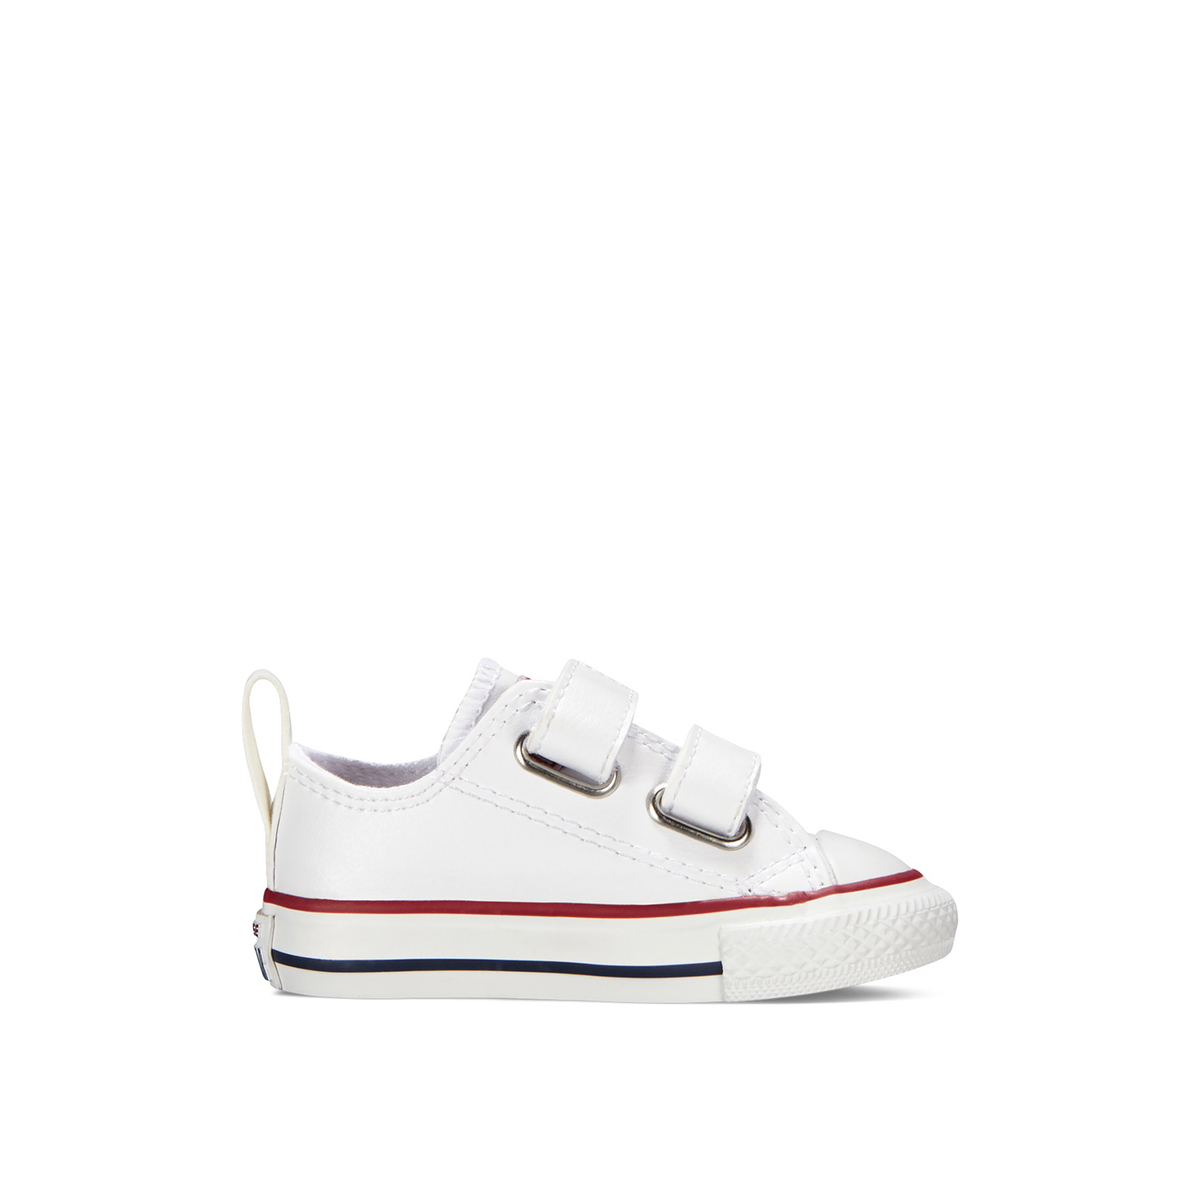 Image of Kids Chuck Taylor All Star 2V Leather Touch 'n' Close Trainers